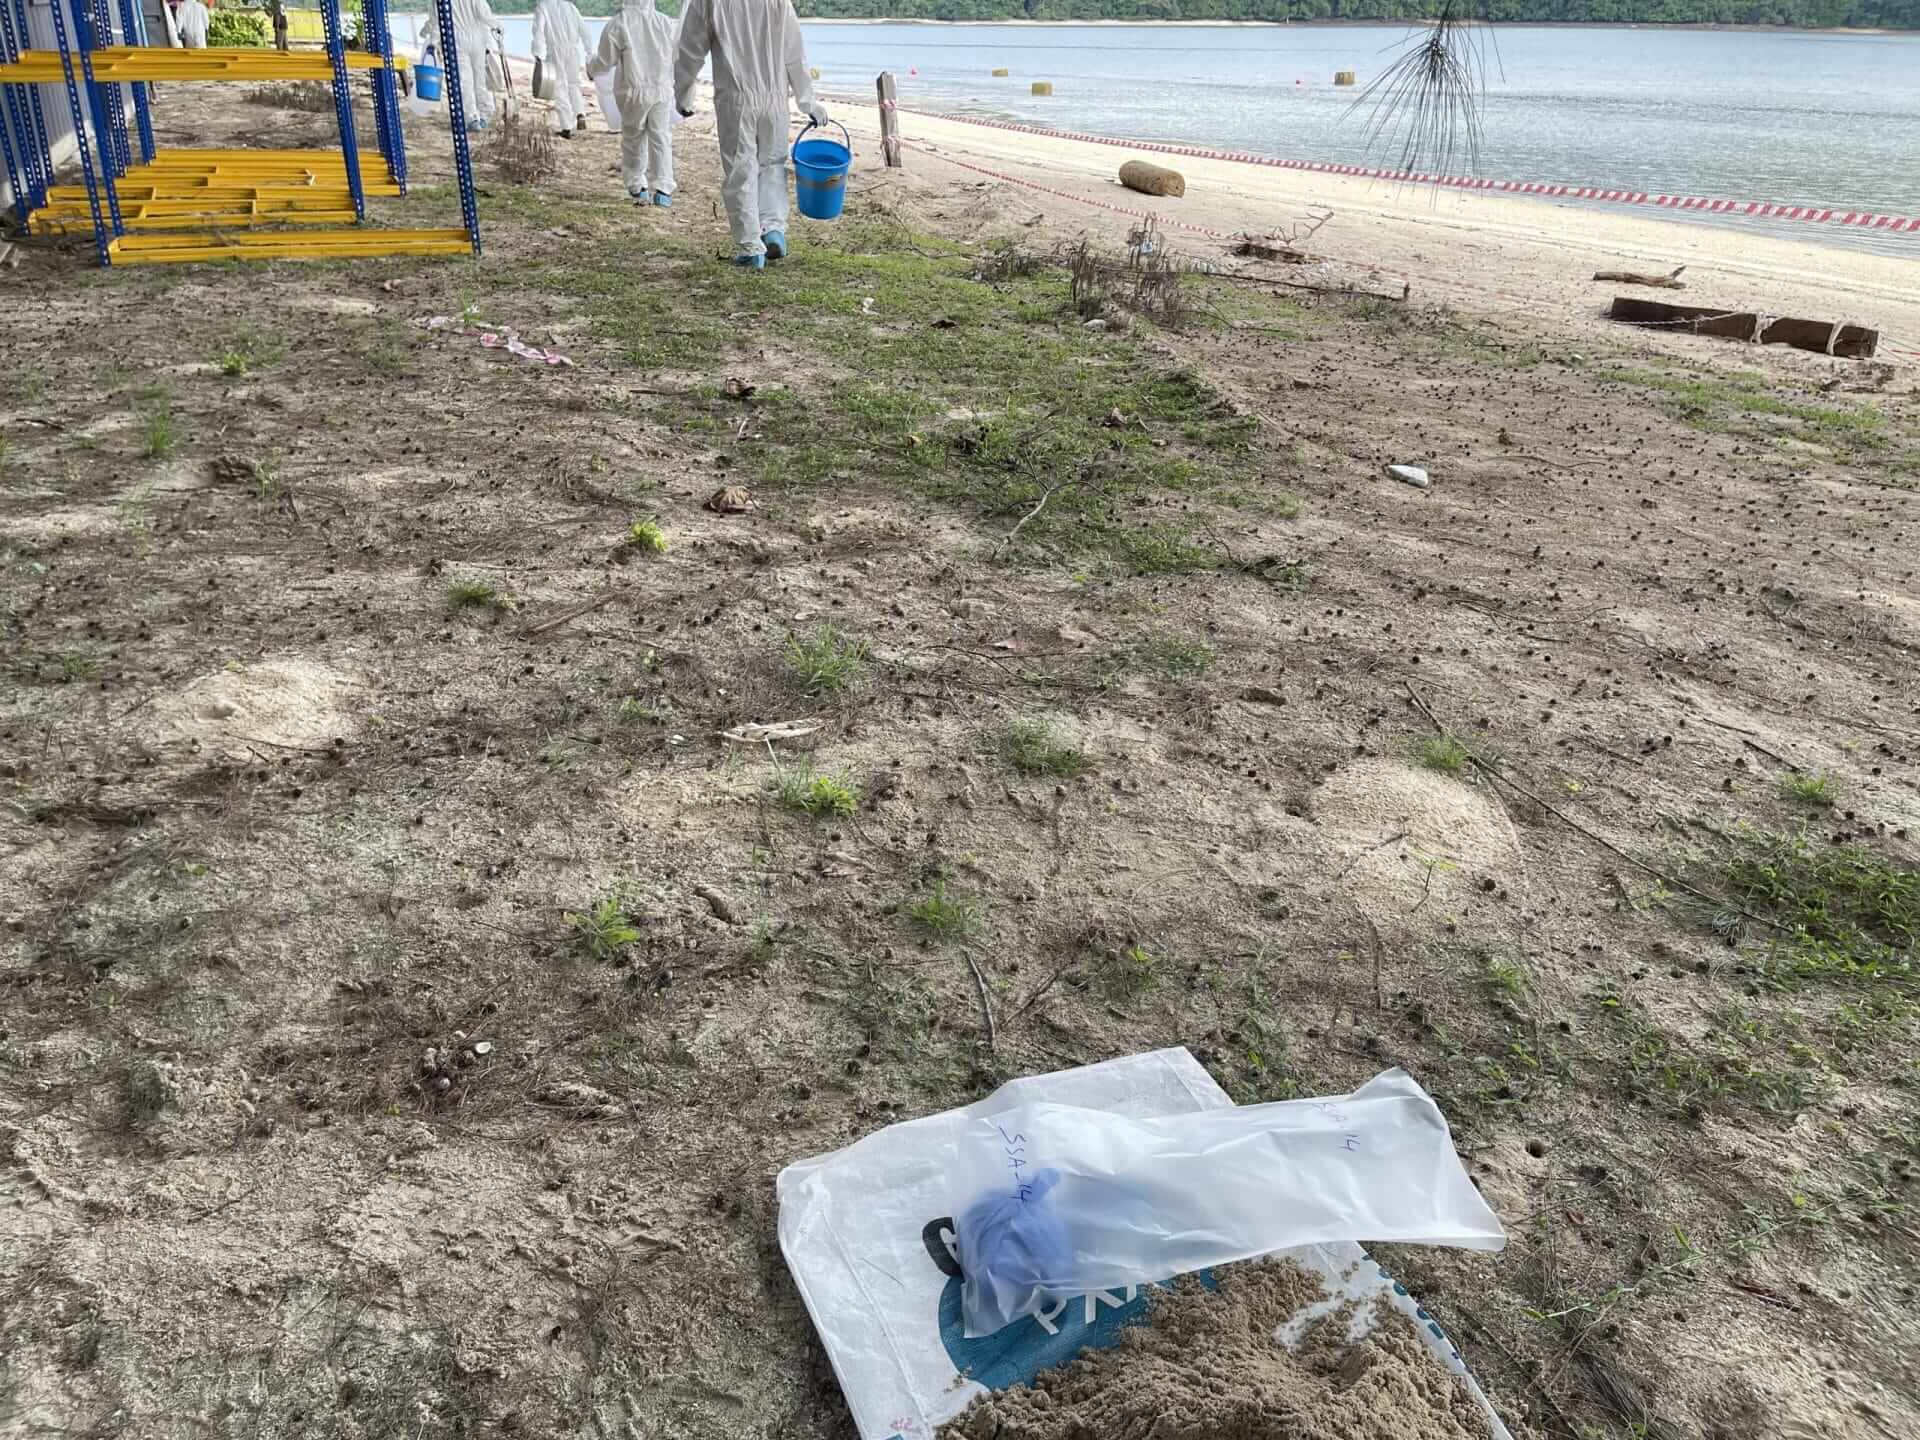 A bag of sand on the beach next to a playground, emphasizing the importance of asbestos awareness training.